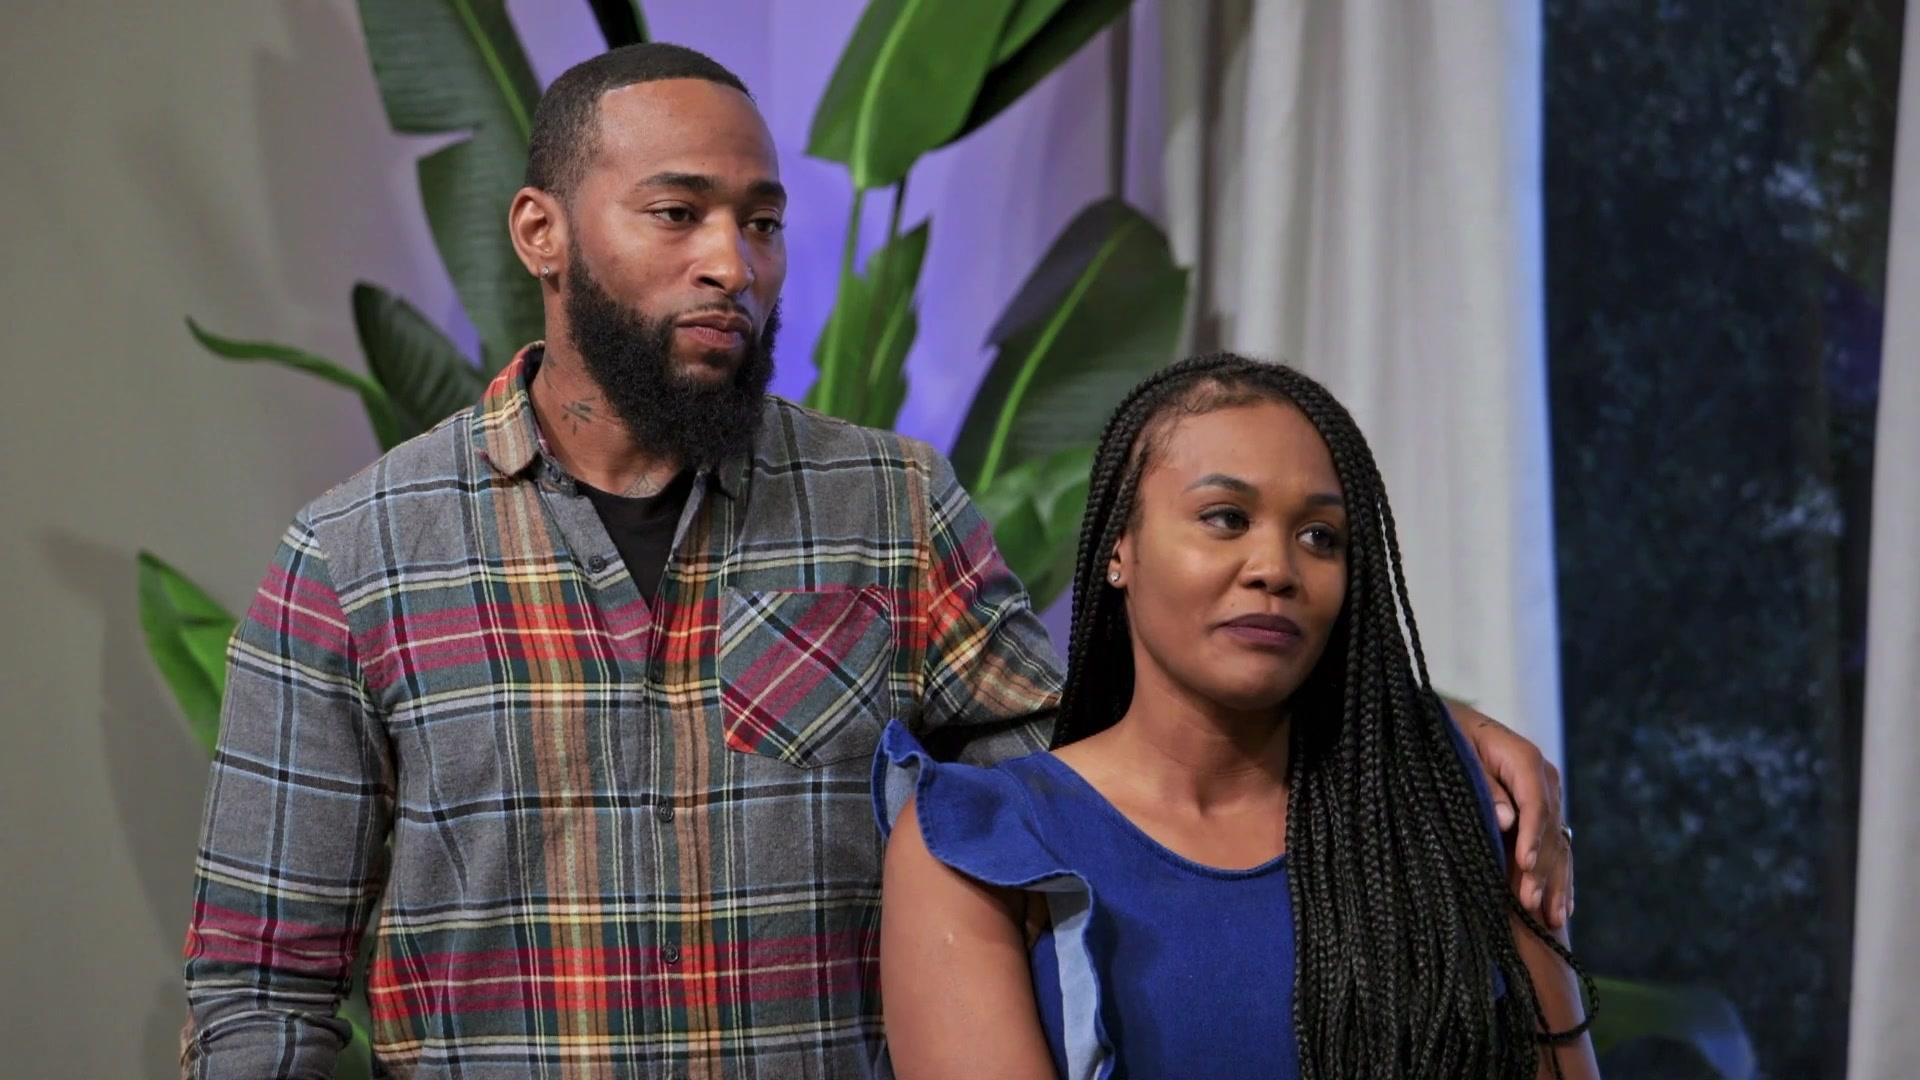 Watch Will Willie Cheat on Shanda Again? | Marriage Boot Camp: Hip Hop Edition Video Extras